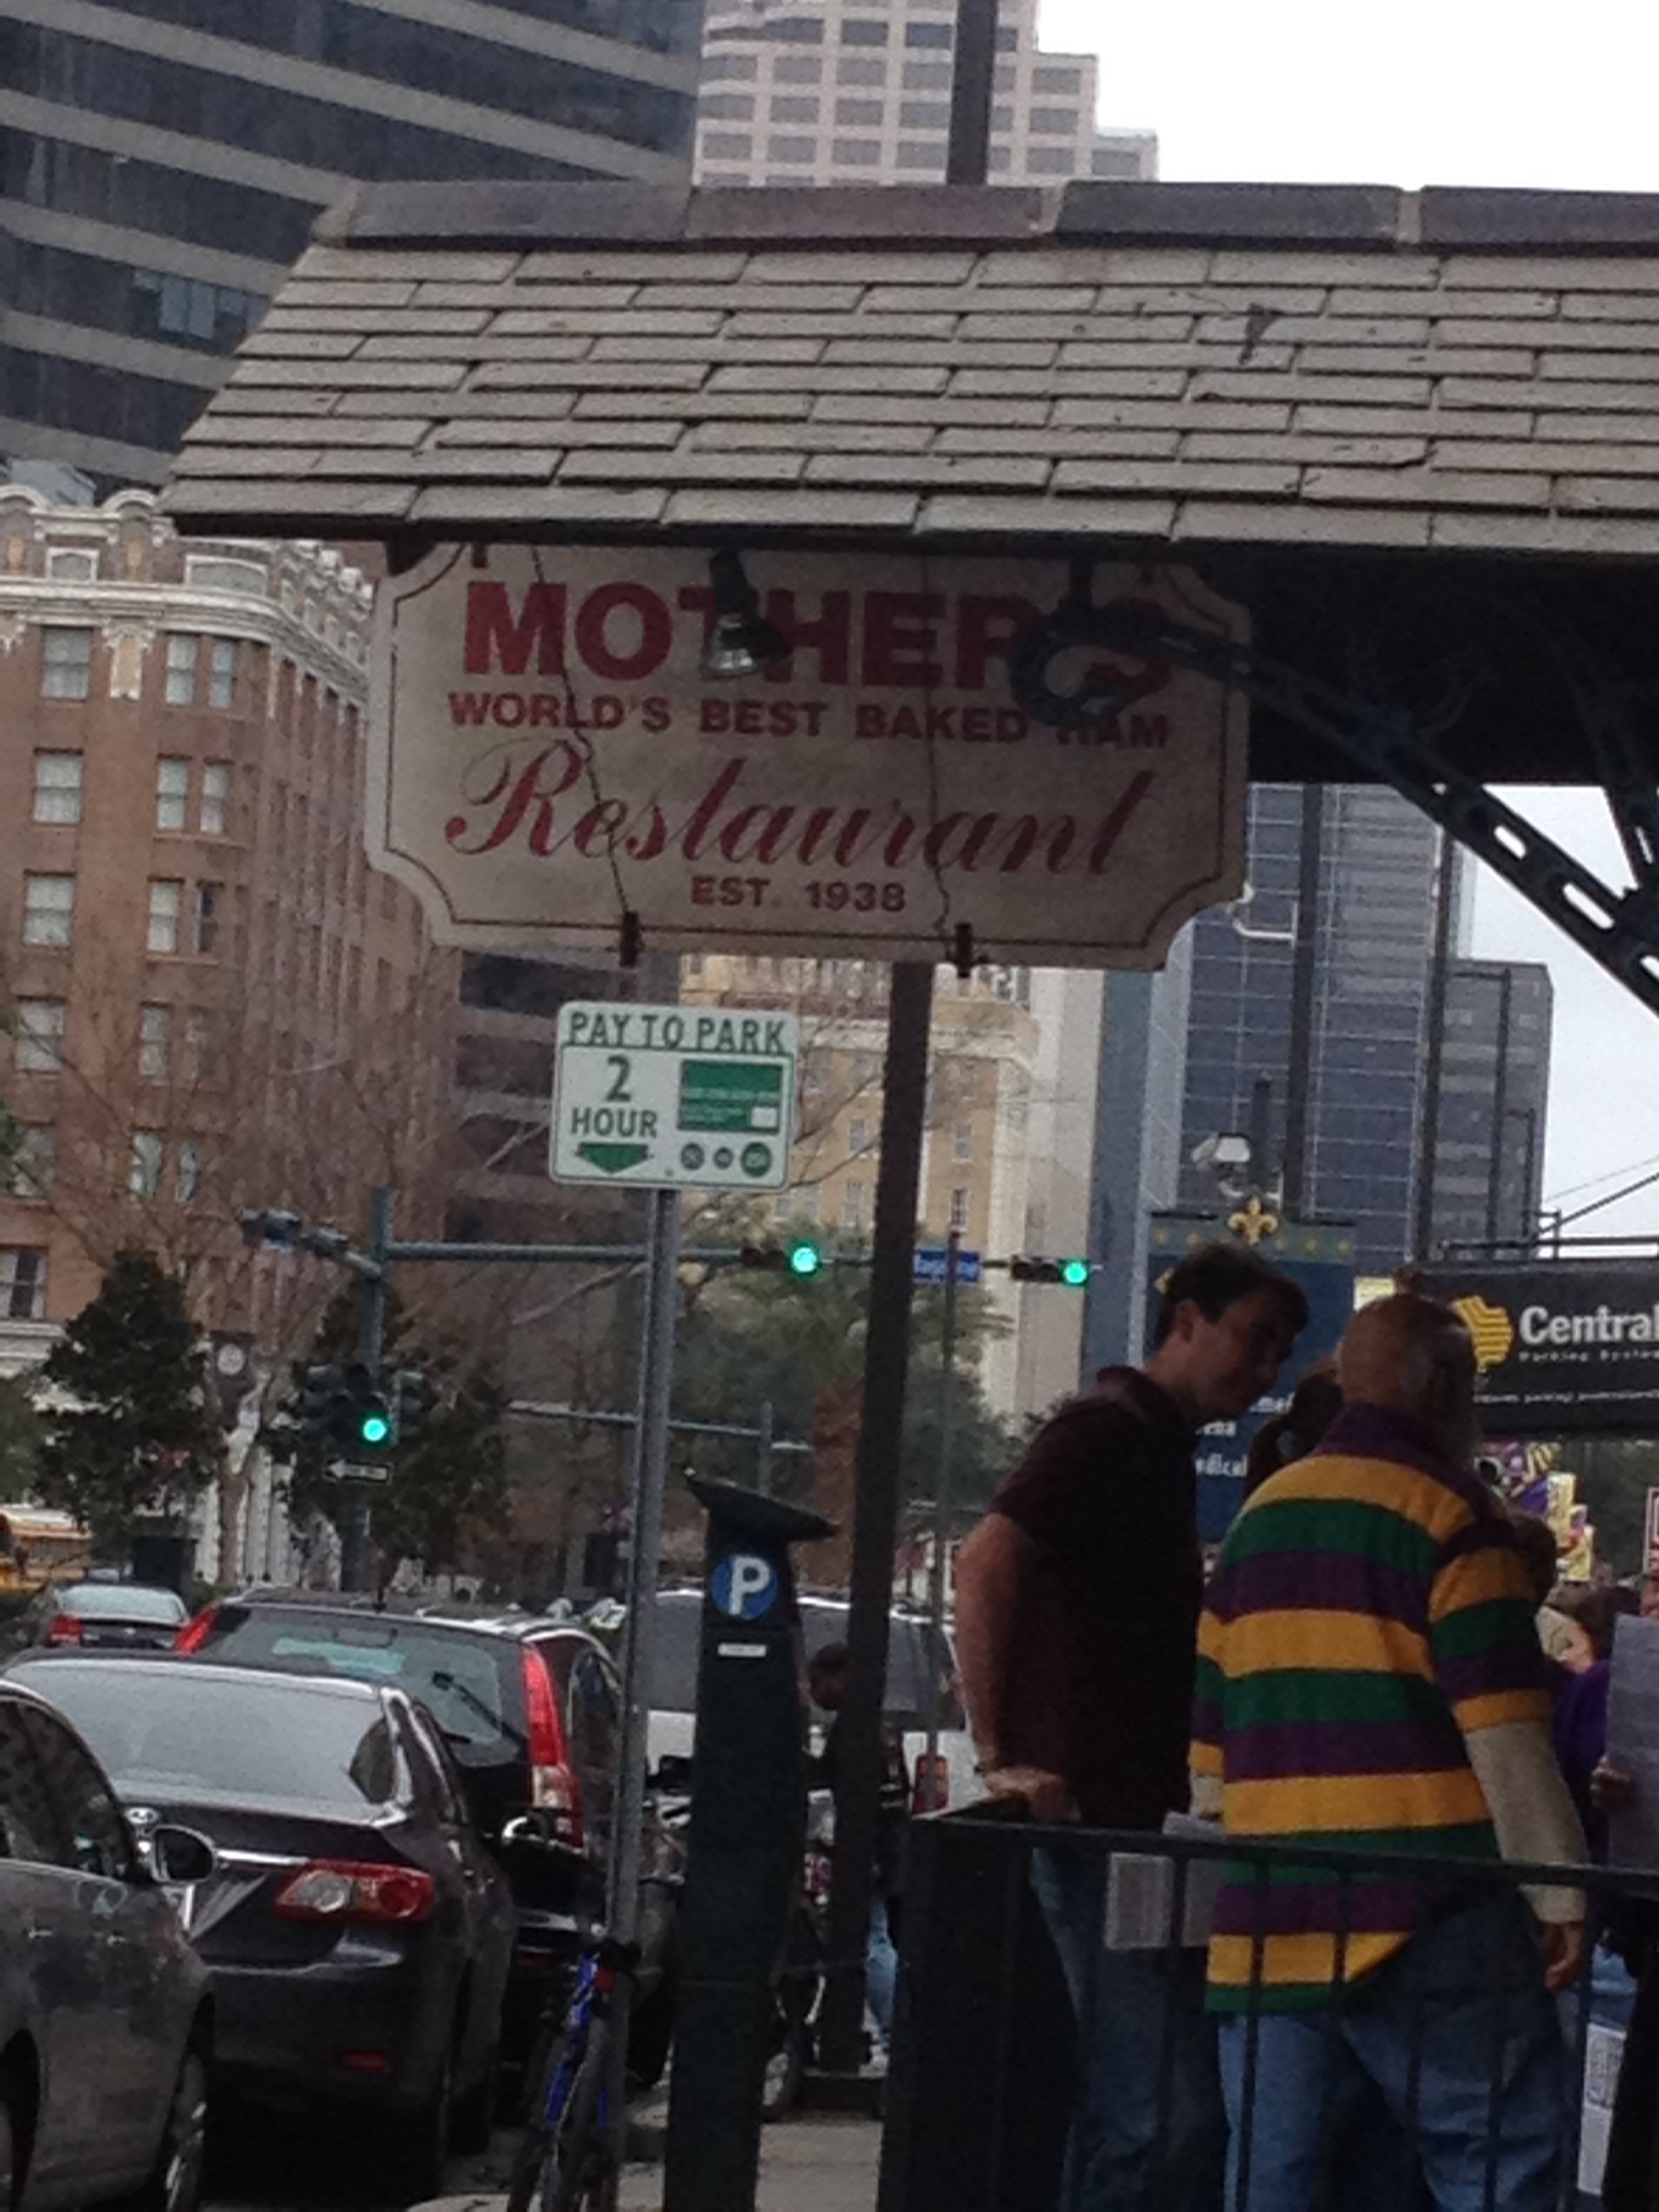 Mothers Restaurant in New Orleans